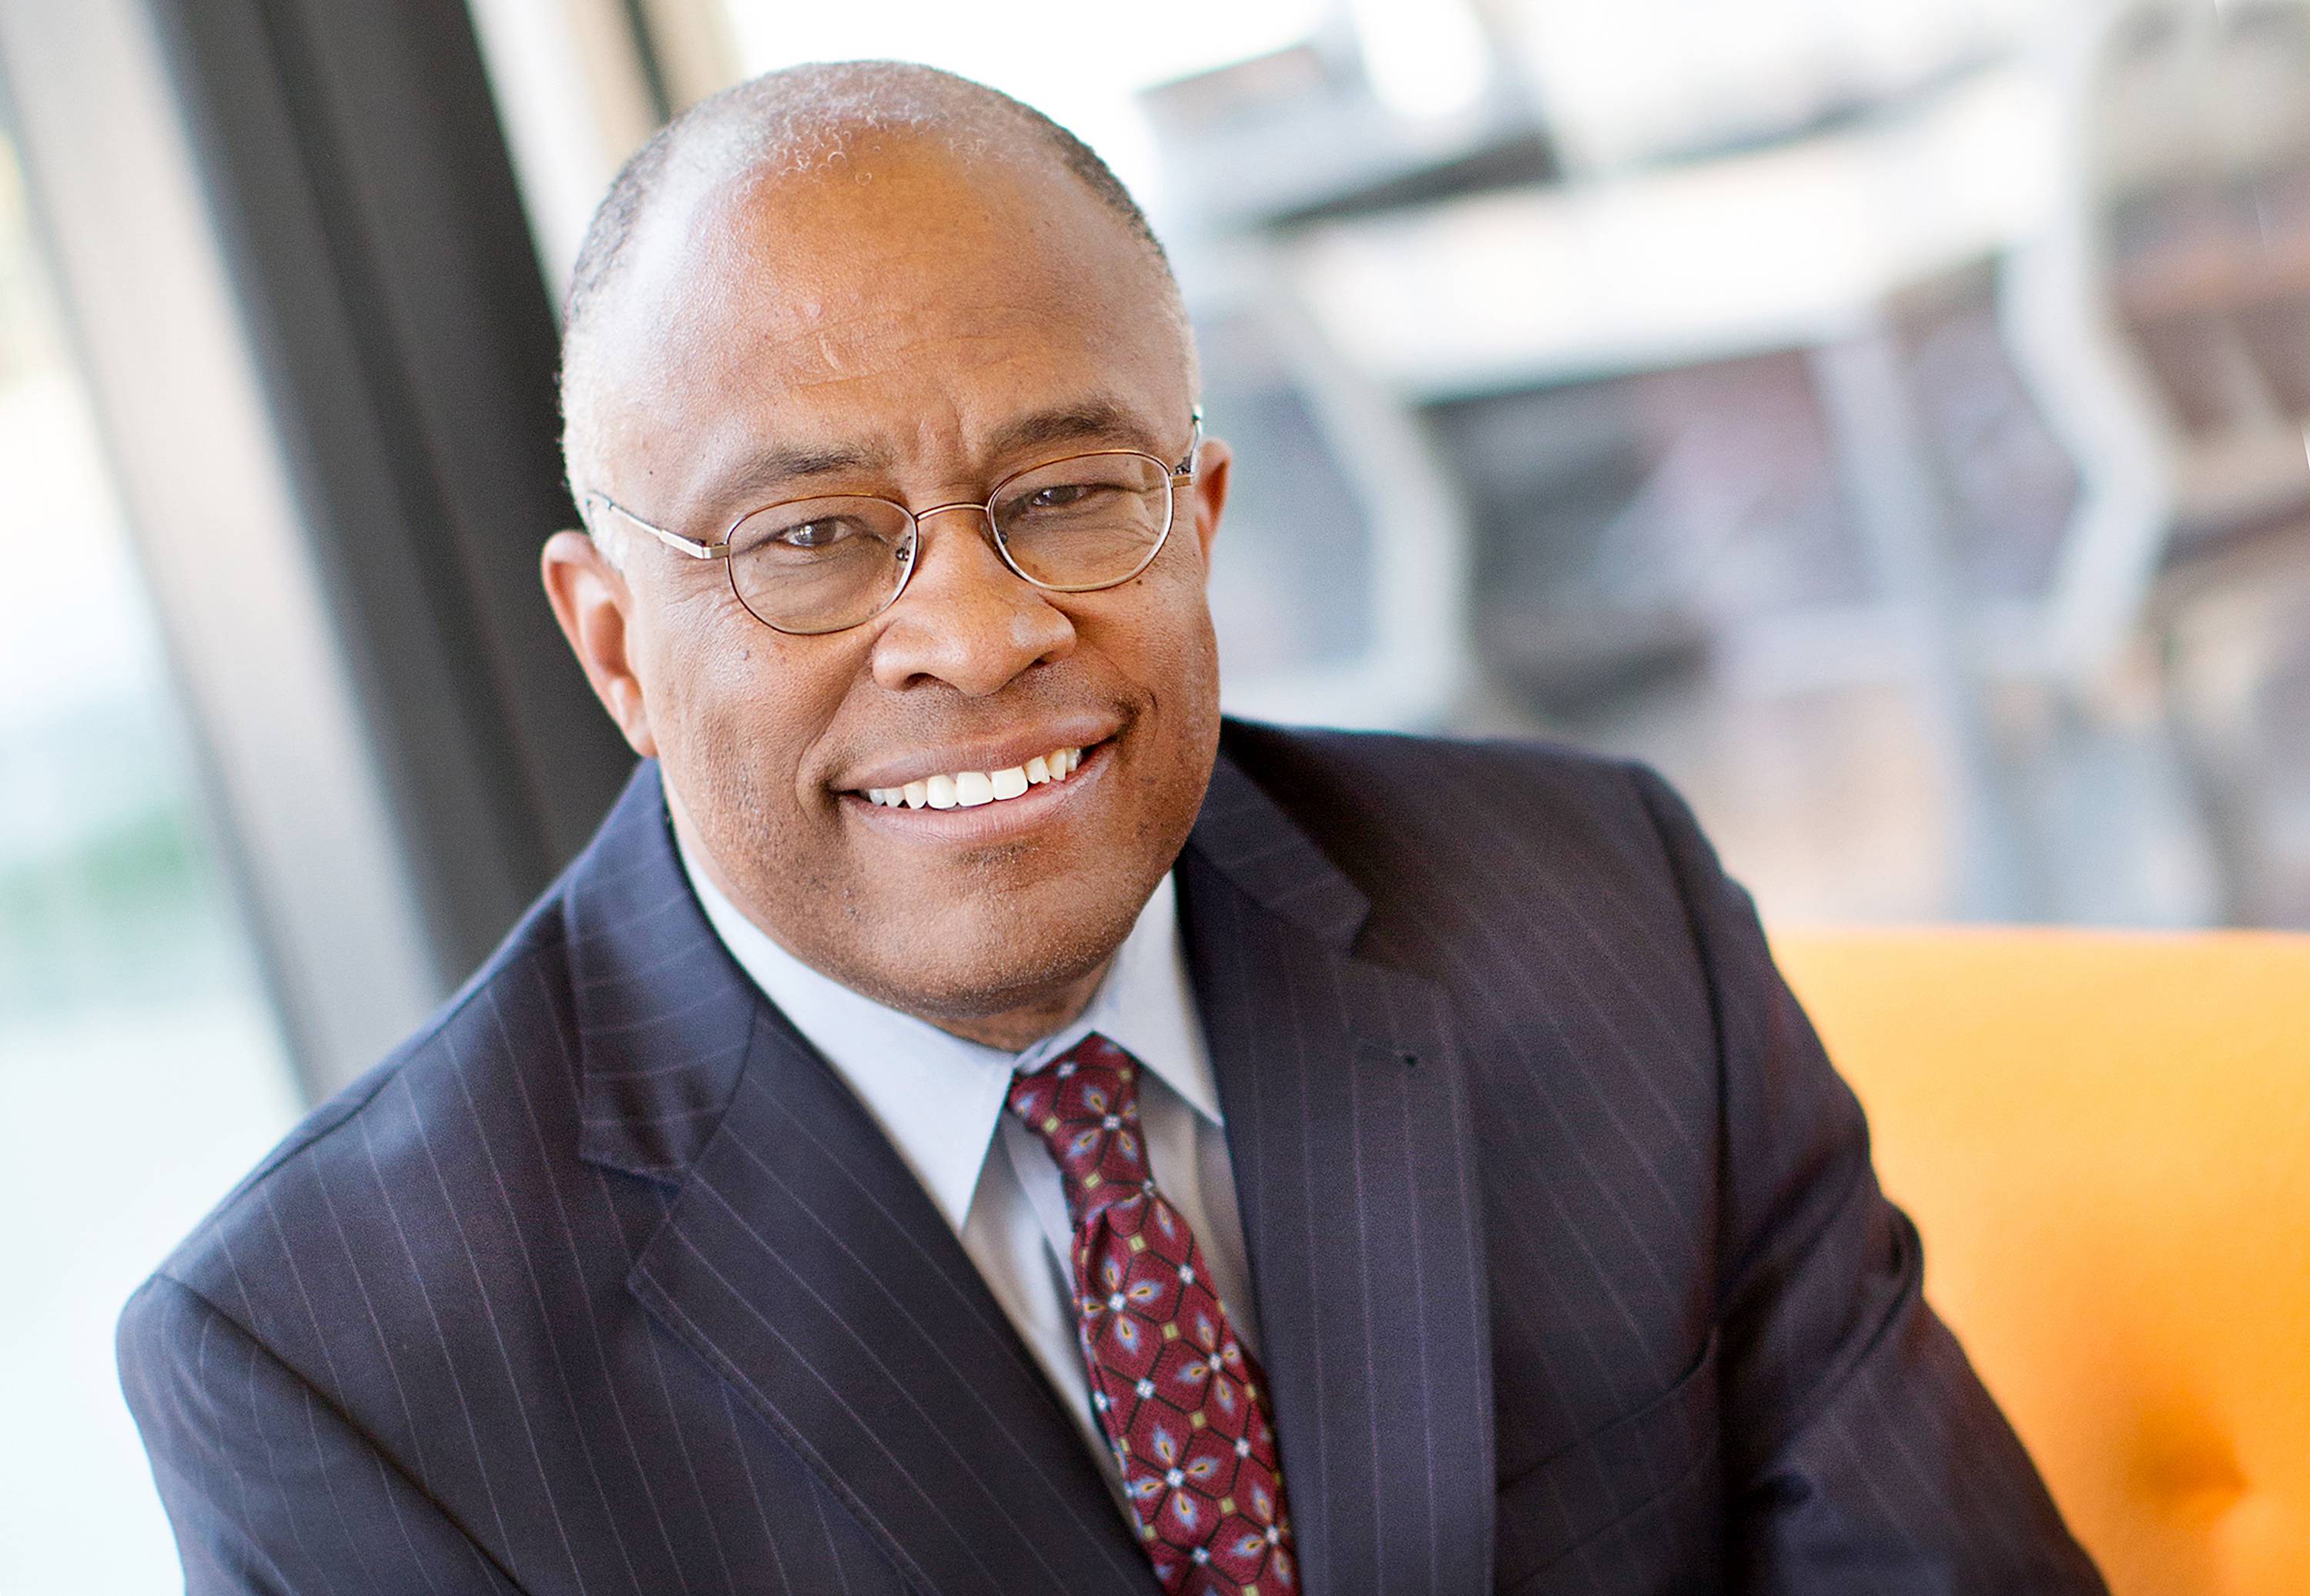 Former Baltimore Mayor Kurt Schmoke applauds approval of marijuana legalization in Maryland but urges caution on implementation of drug law reforms.